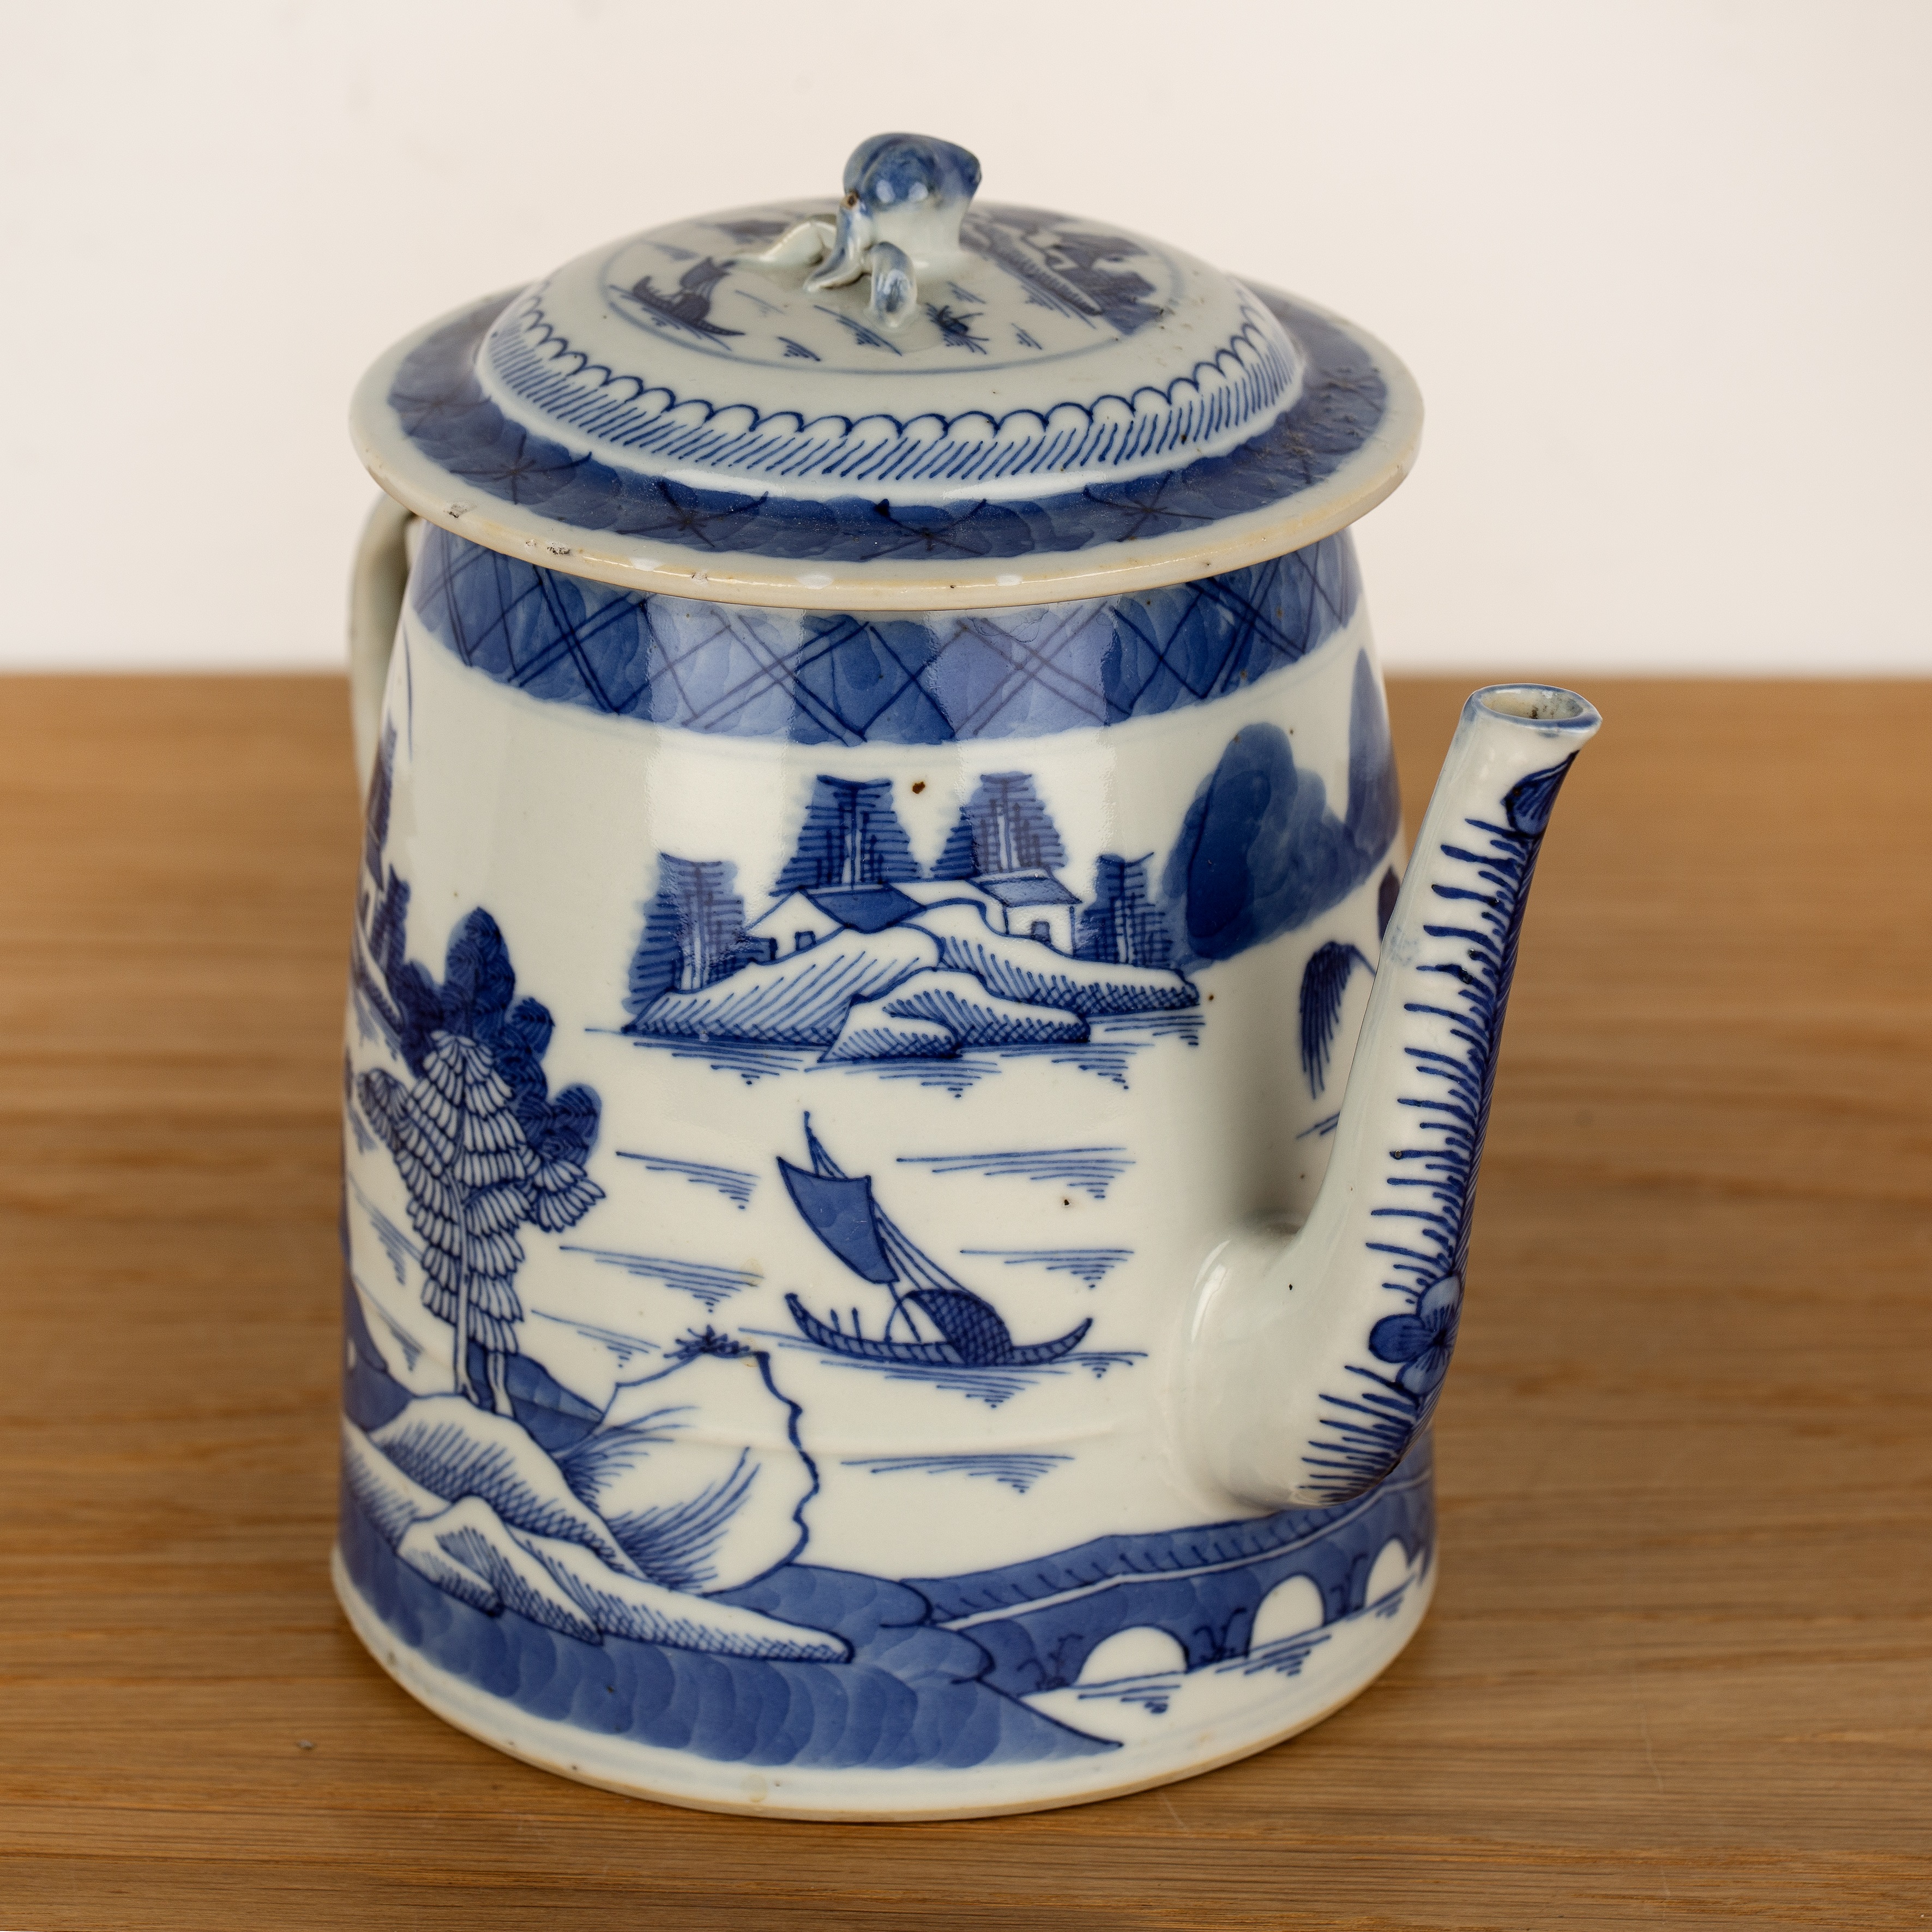 Blue and white export porcelain teapot Chinese, 19th Century painted with temples and a lake - Image 3 of 6